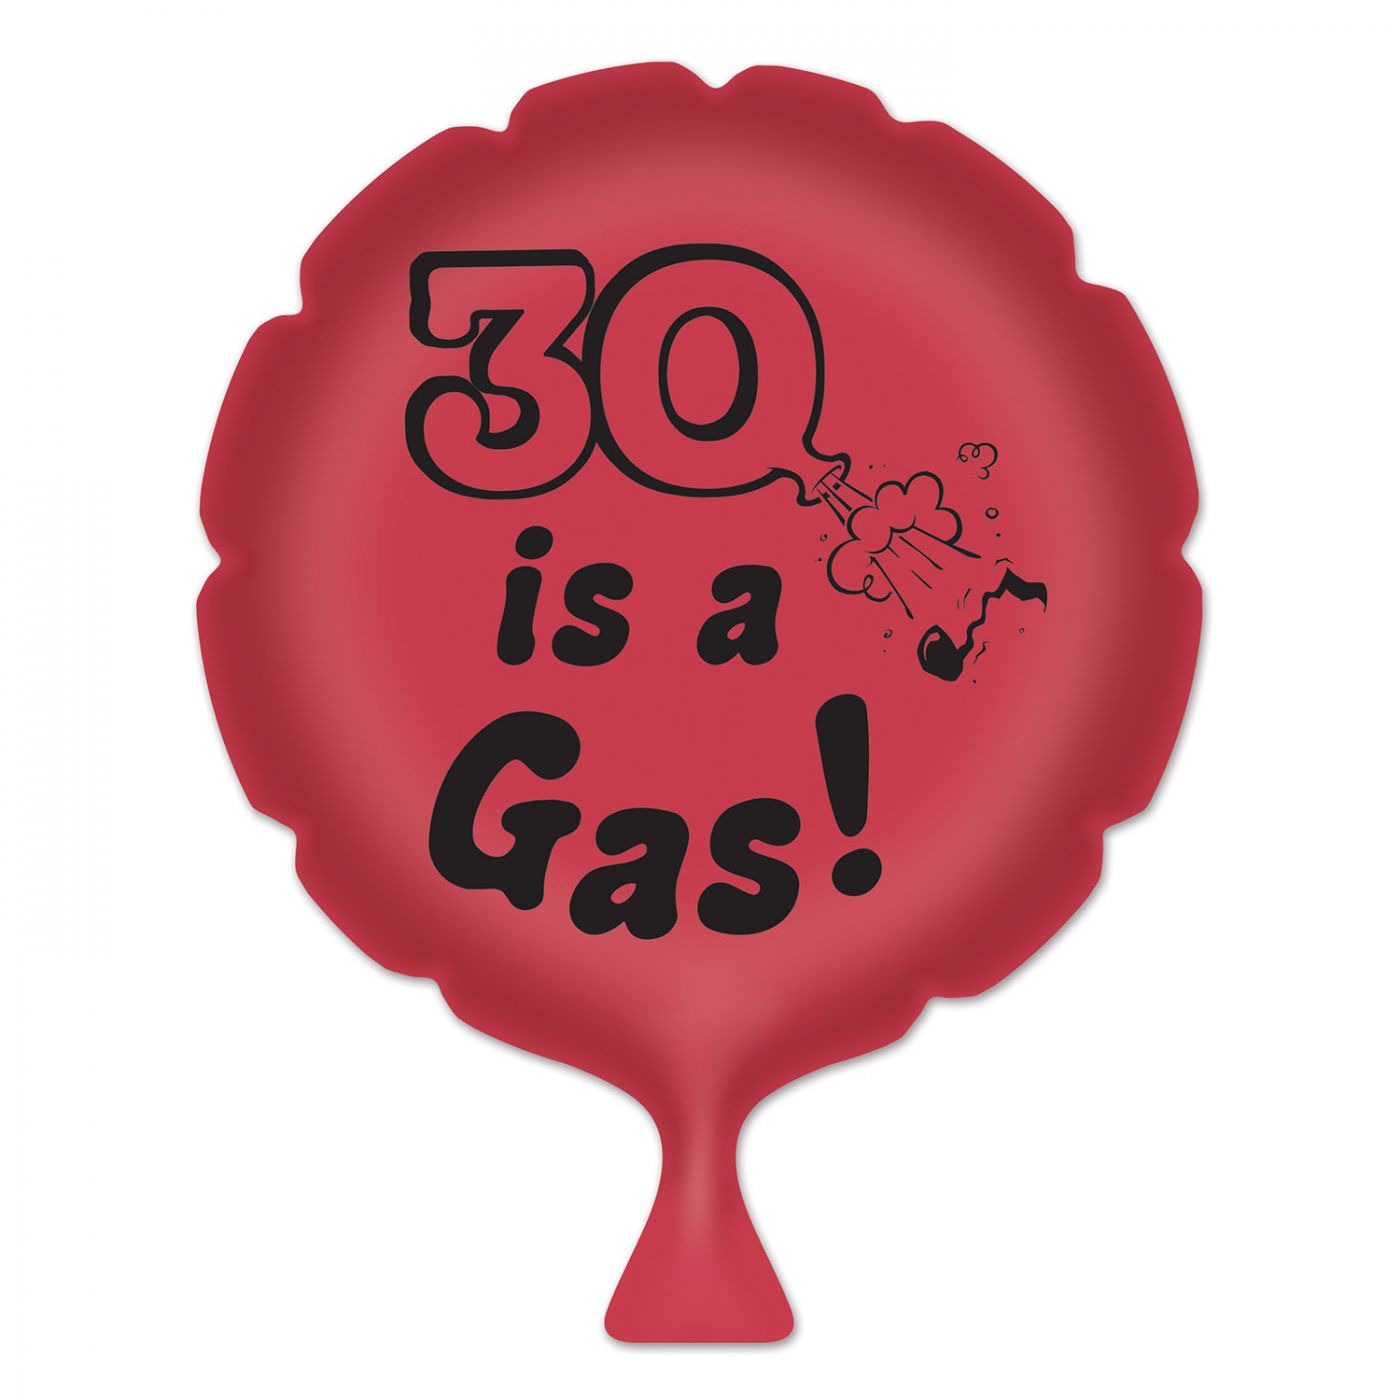  30  Is A Gas! Whoopee Cushion (6) image